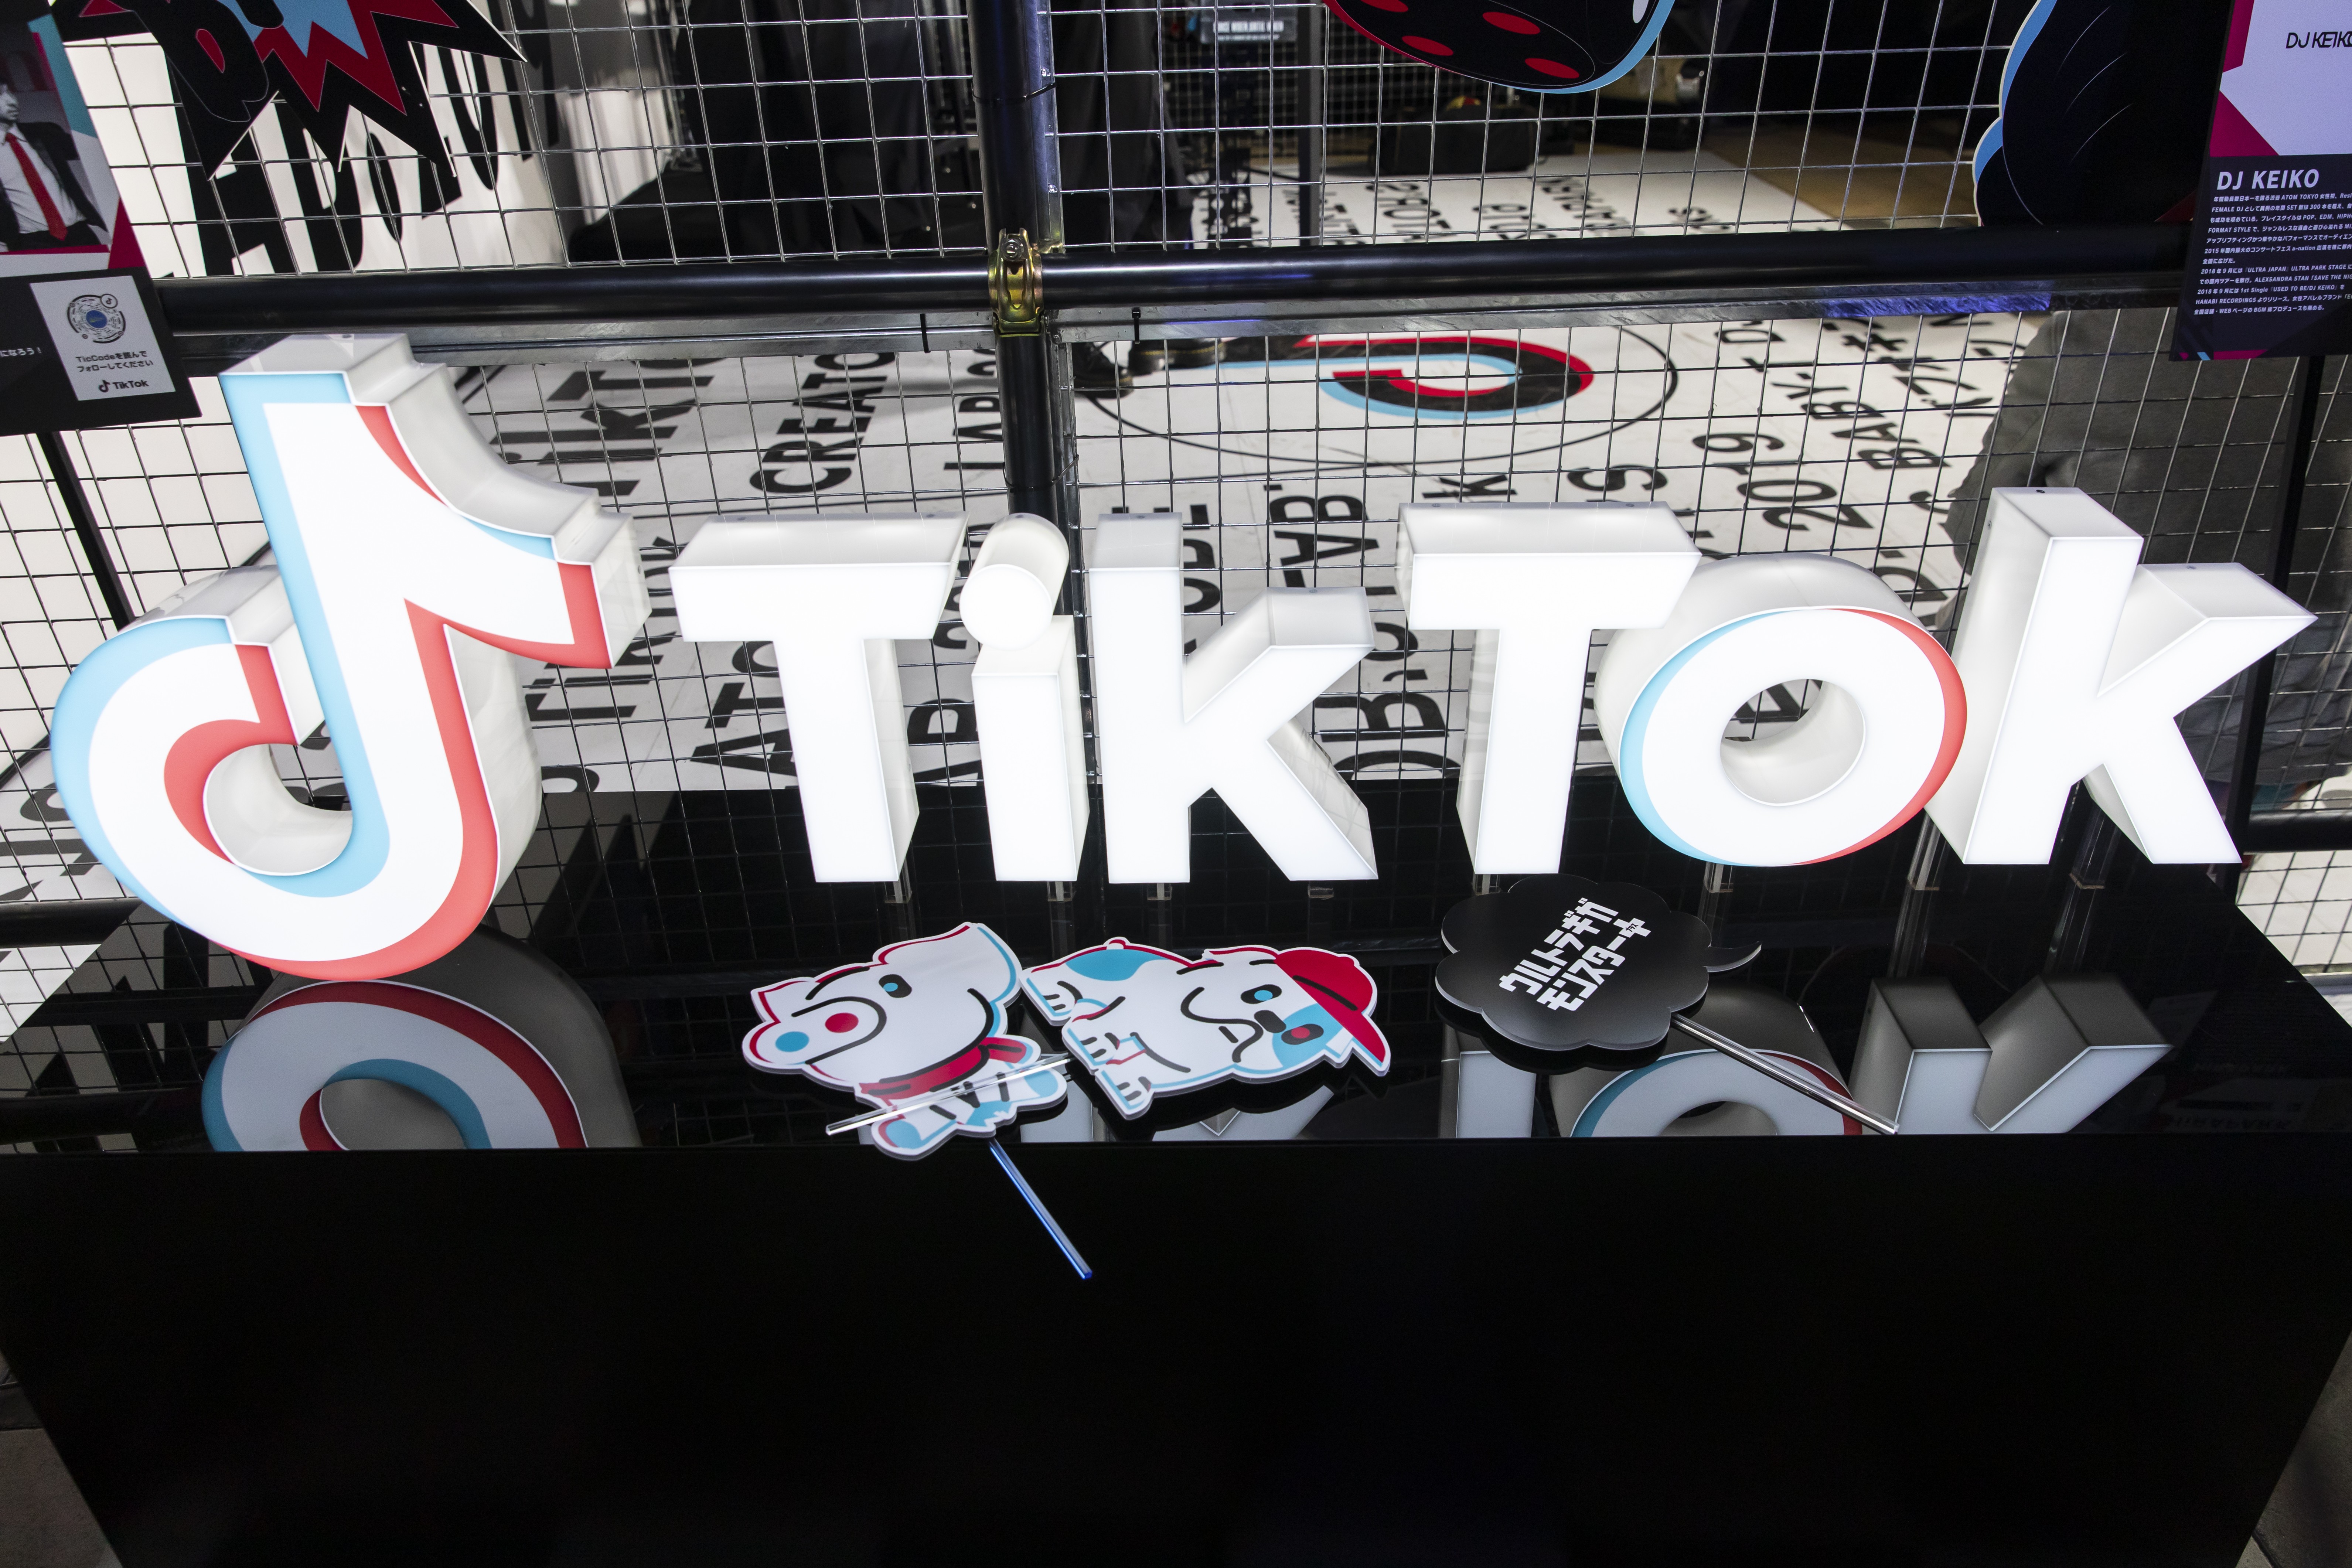 Signage is displayed at the TikTok Creator's Lab 2019 event hosted by ByteDance in Tokyo, Japan, on Saturday, Feb. 16, 2019. Photo: Bloomberg